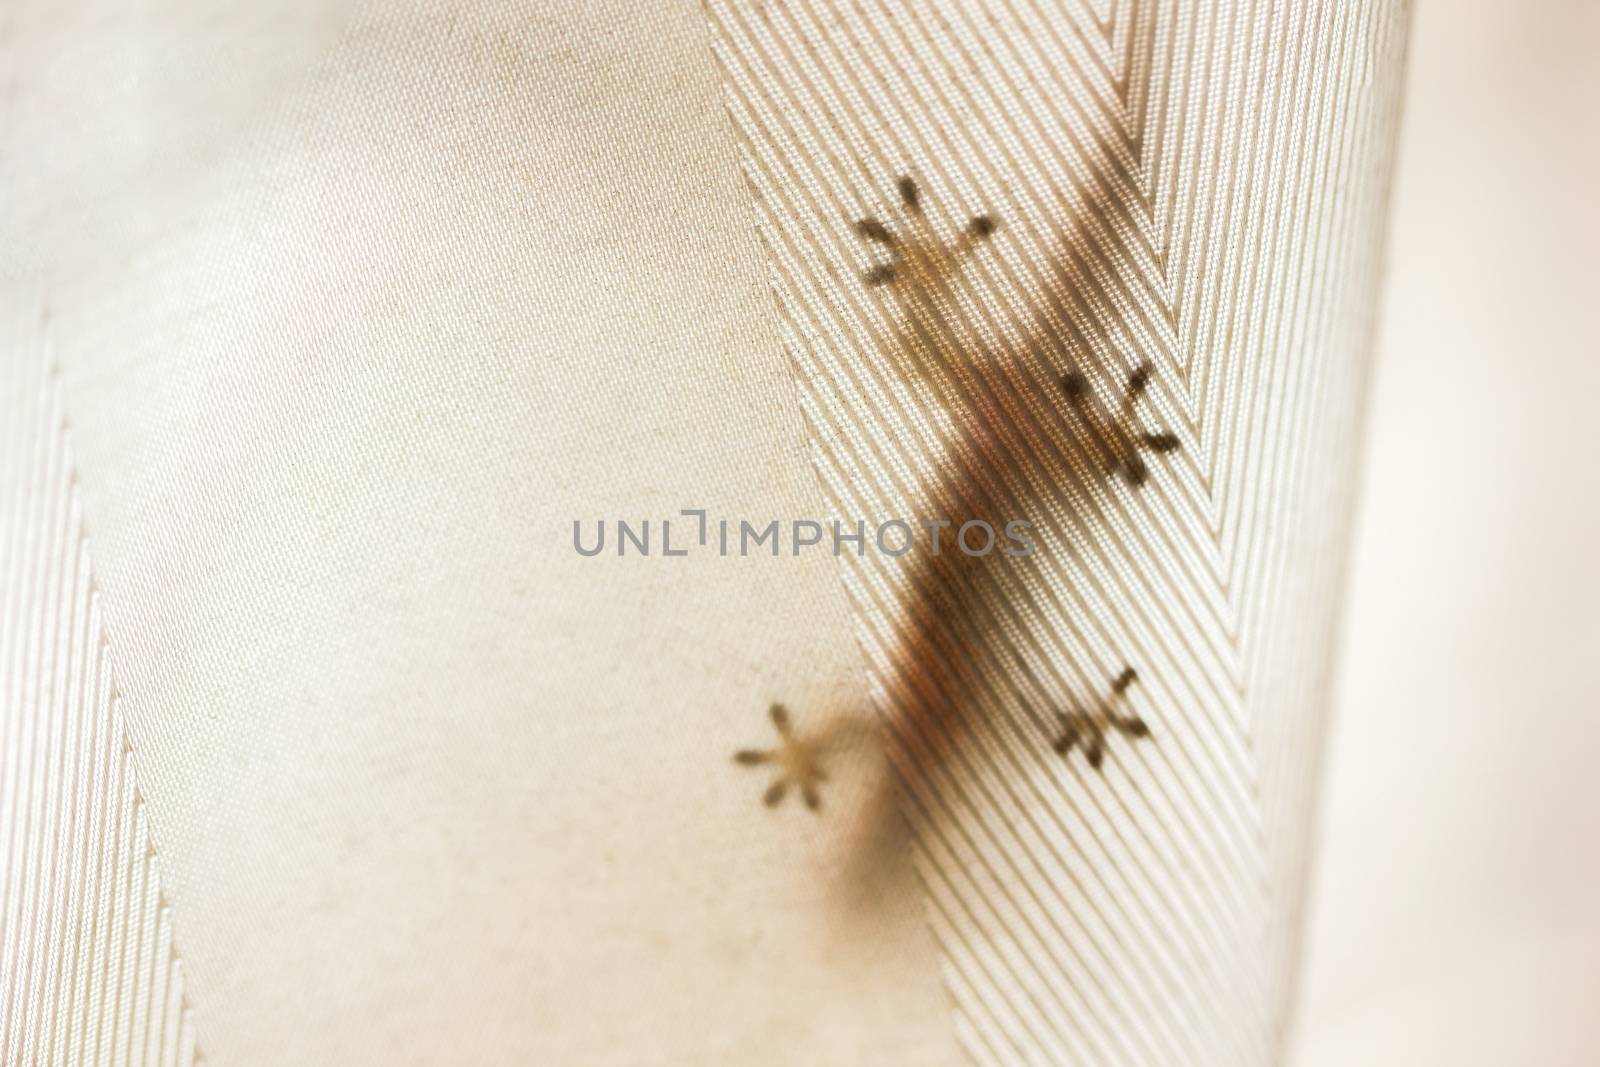 Home lizards hiding behind curtains. Find insects for food. Copy space for text.